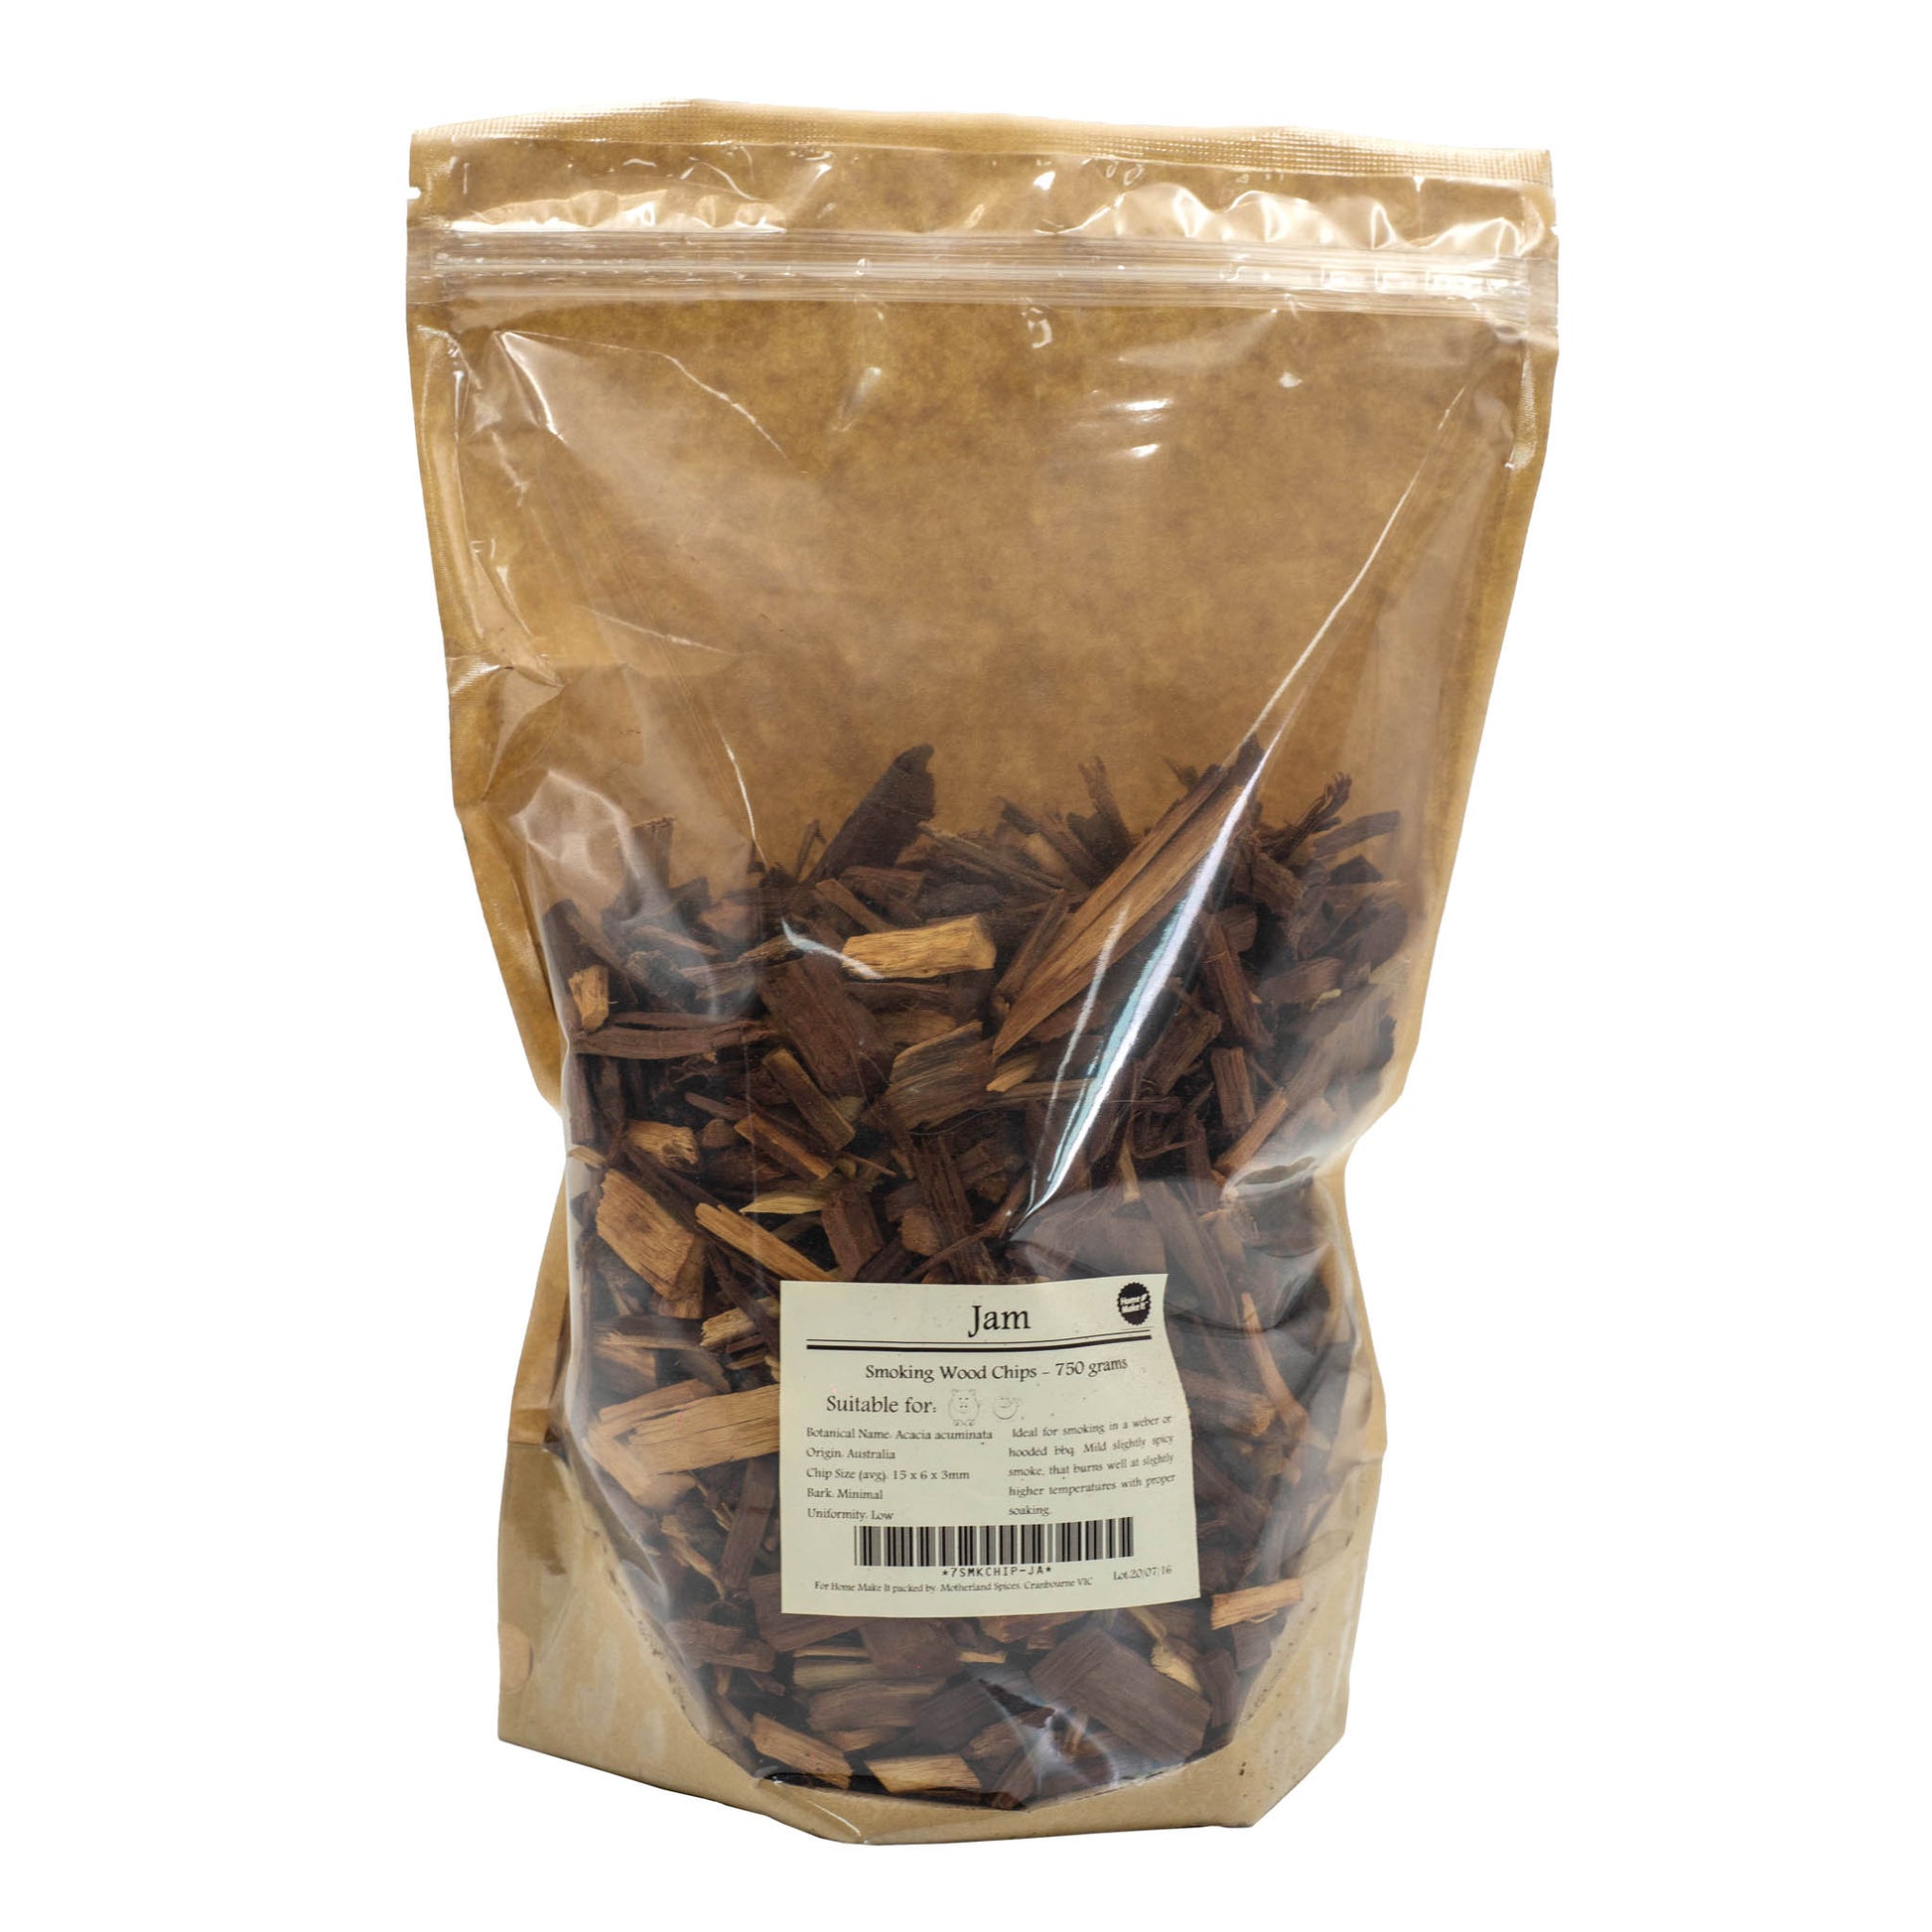 750 gram bag of Jam smoking wood chips. burns at higher temperatures and perfect for pork and poultry. 